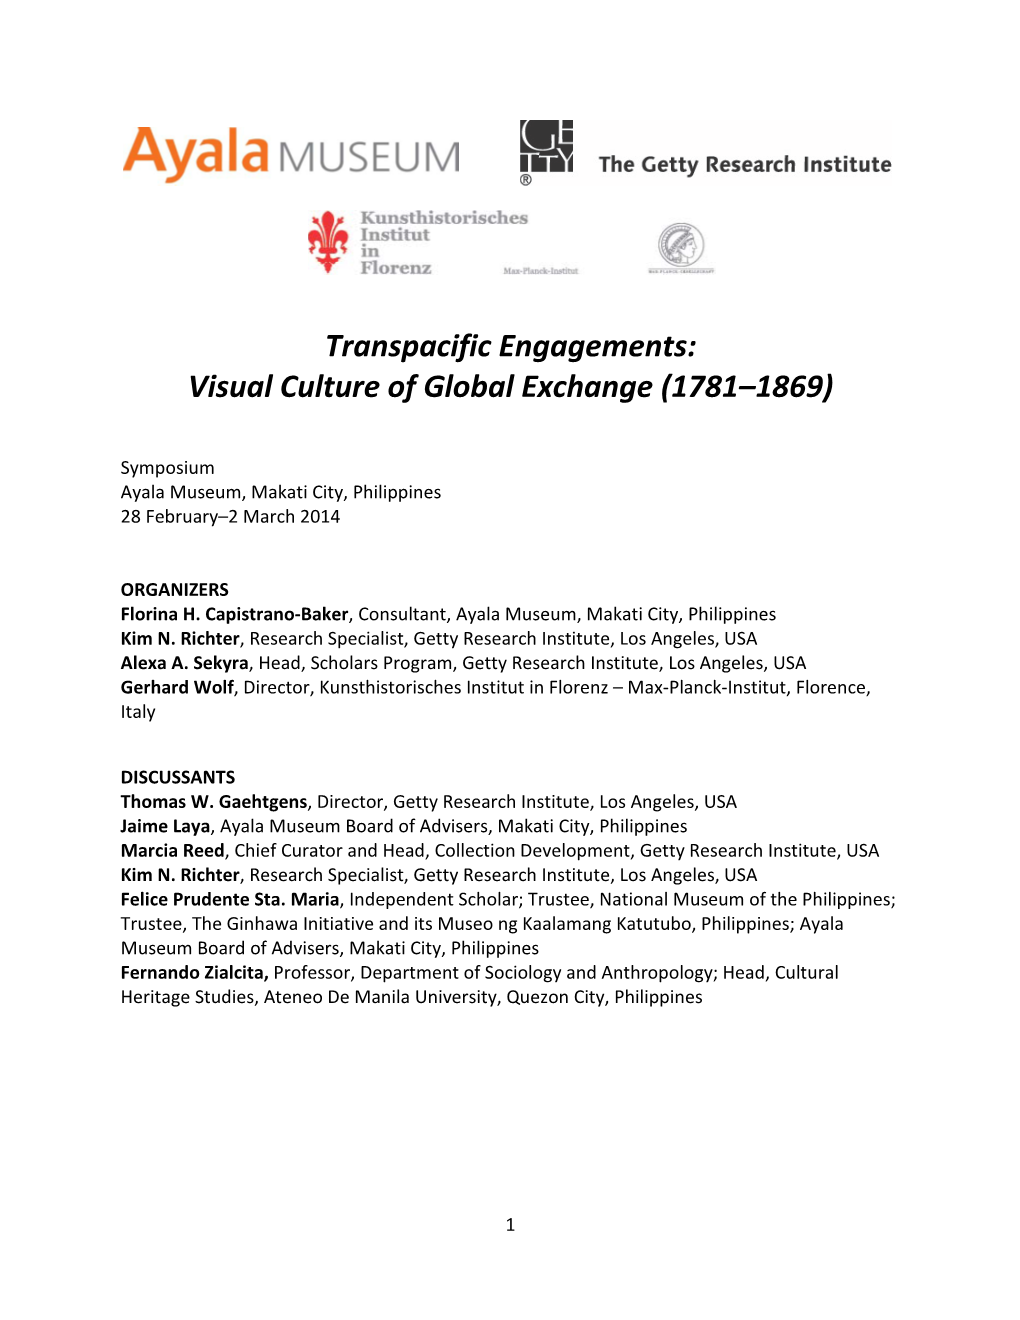 Transpacific Engagements: Visual Culture of Global Exchange (1781–1869)